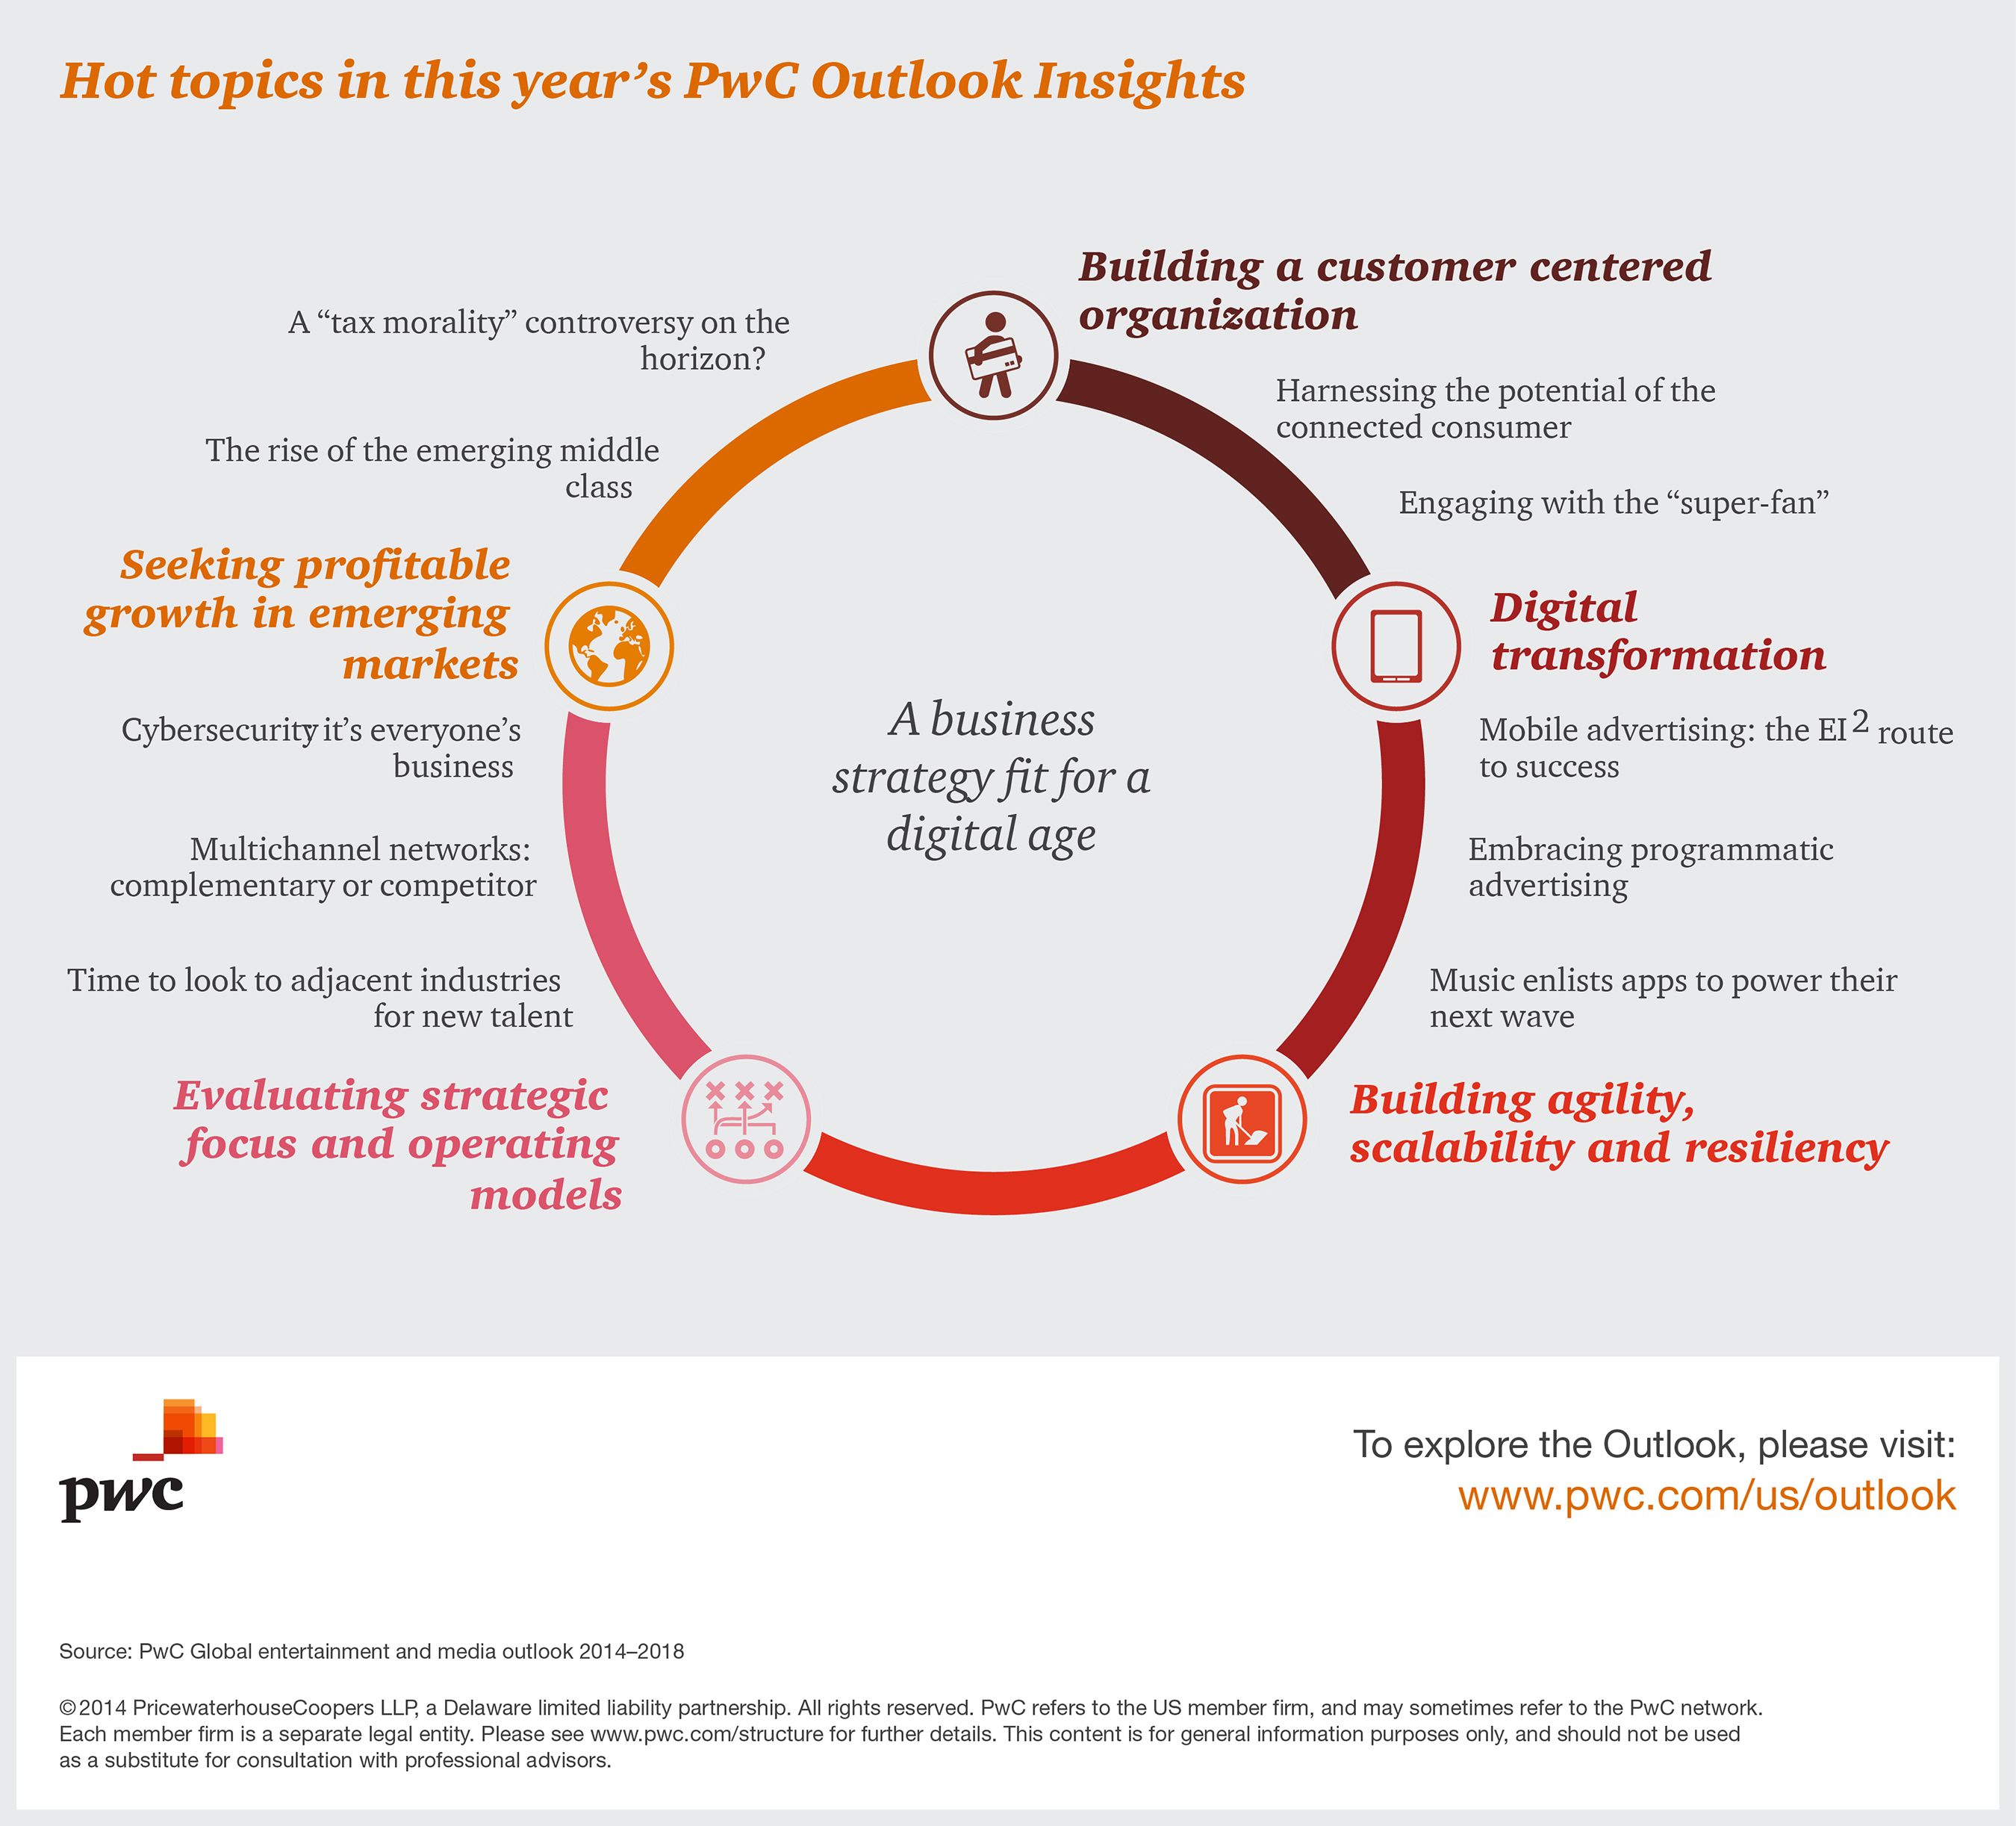 Hot topics in this year's PwC Outlook Insights. (PRNewsFoto/PwC US)